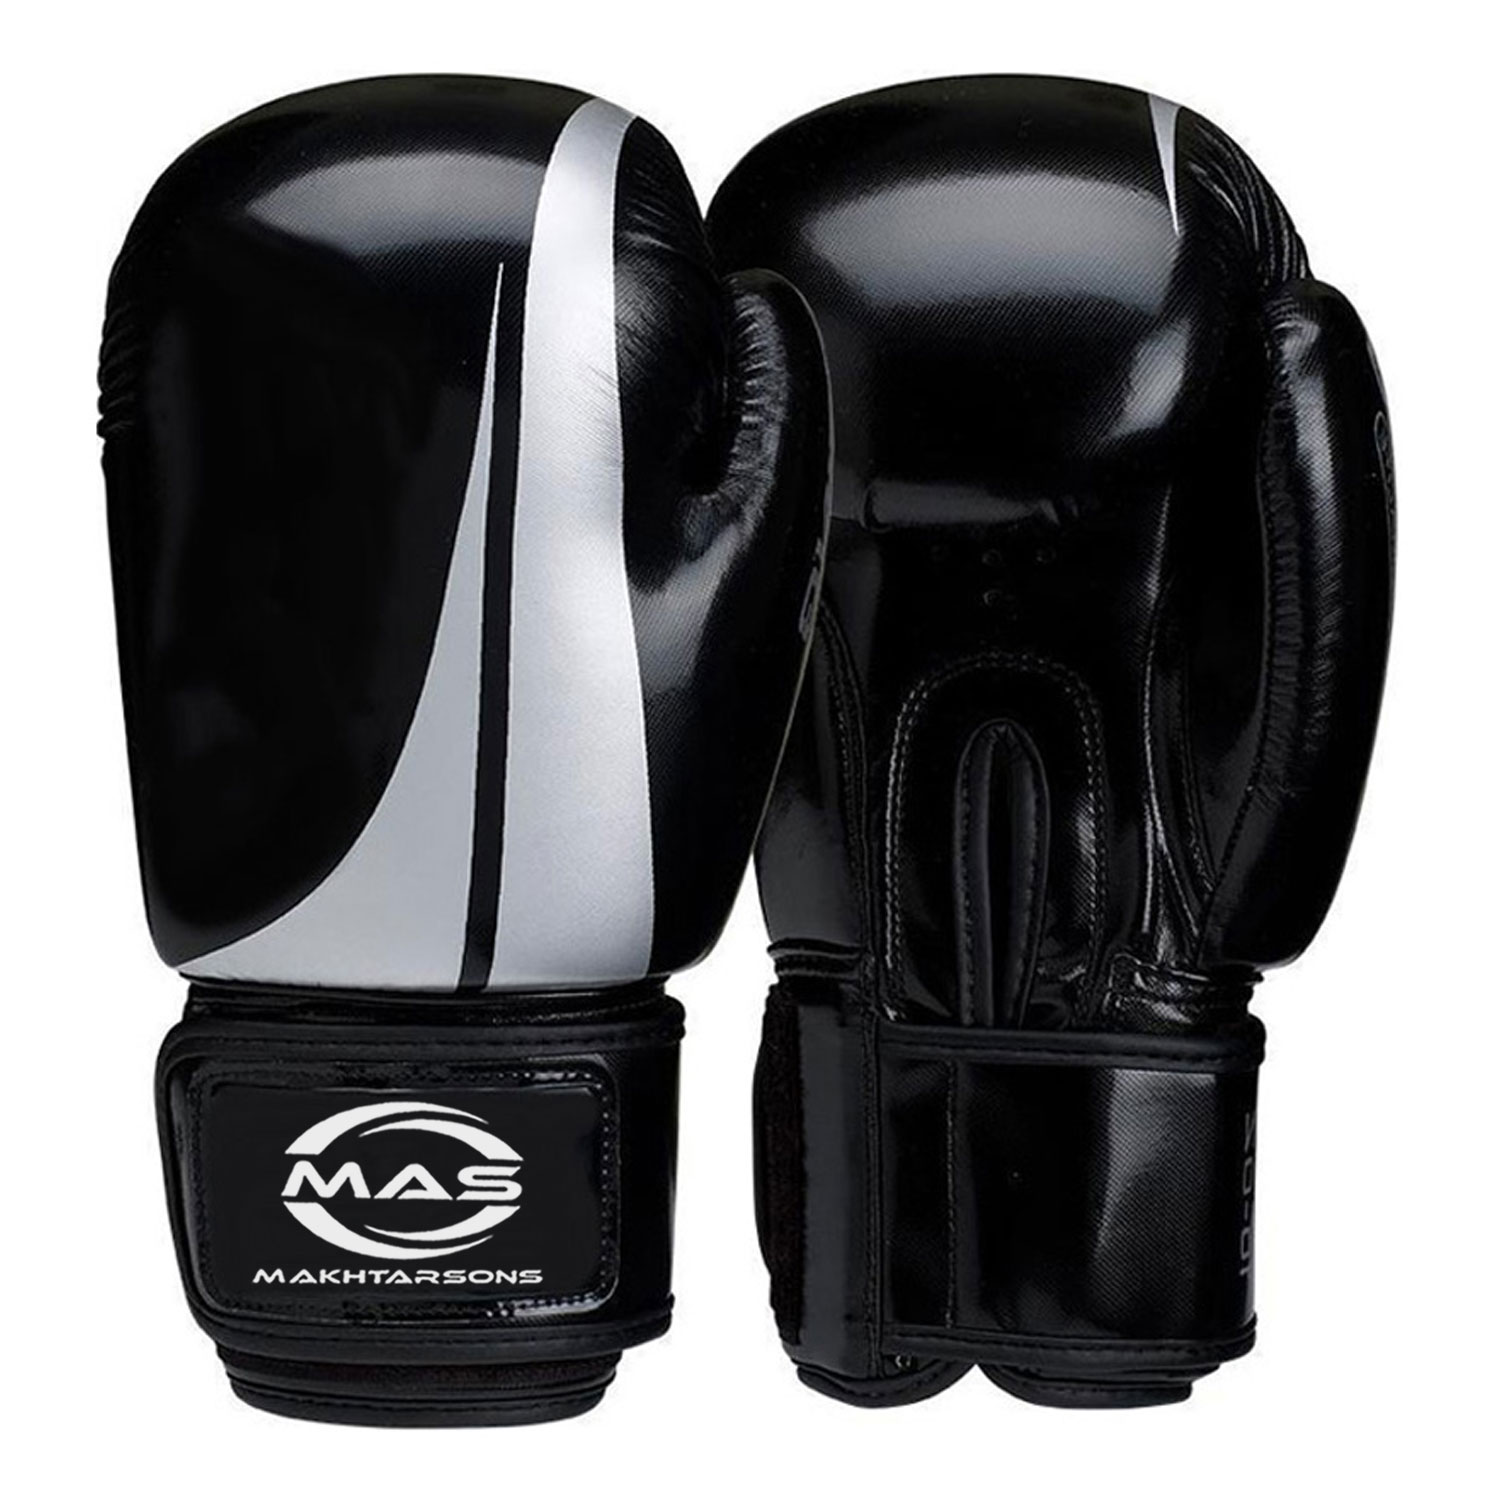 PROFESSIONAL BOXING GLOVES | MAS 205